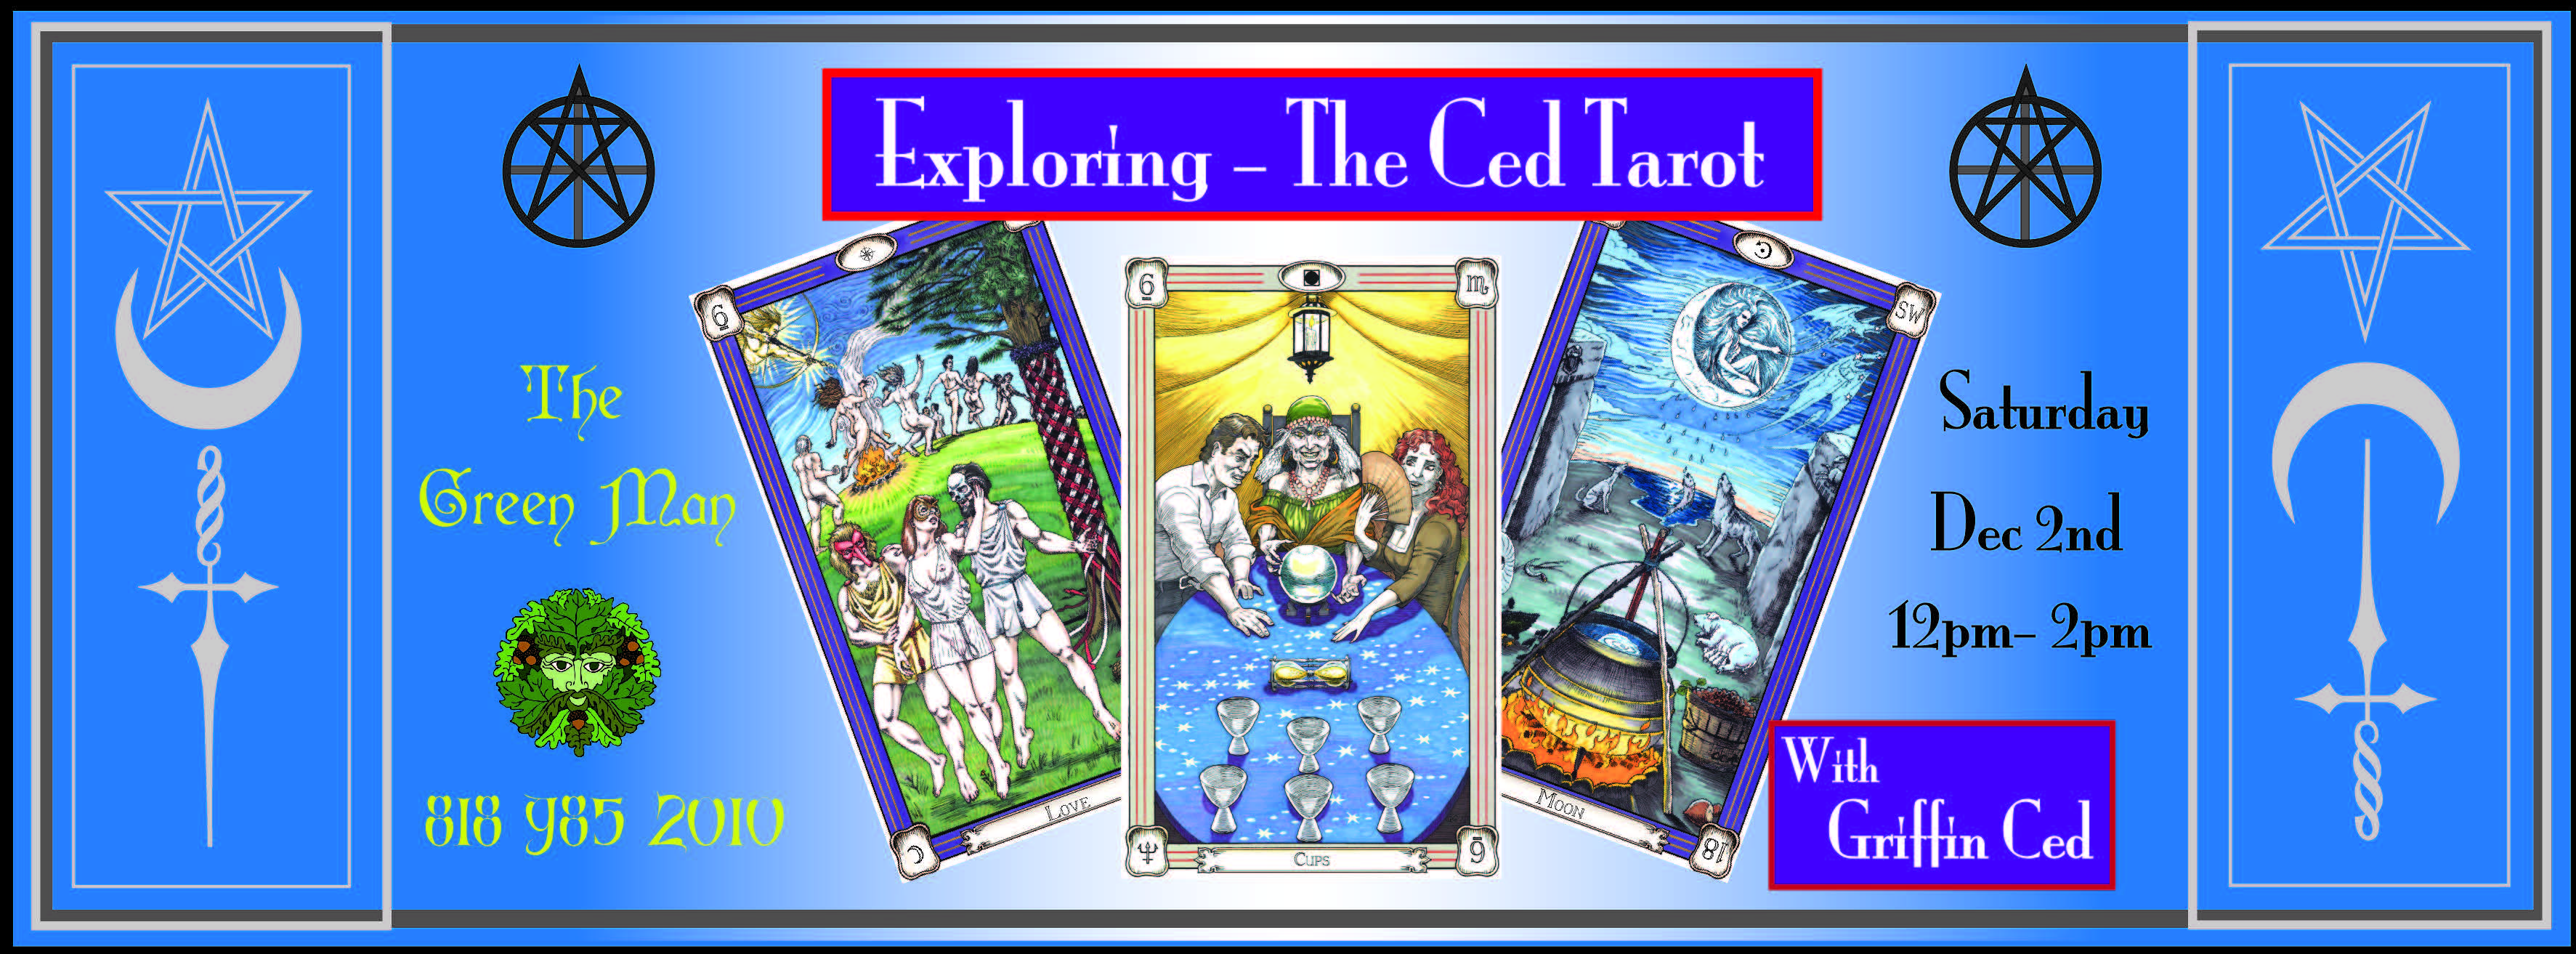 Exploring the Ced Tarot with Griffin